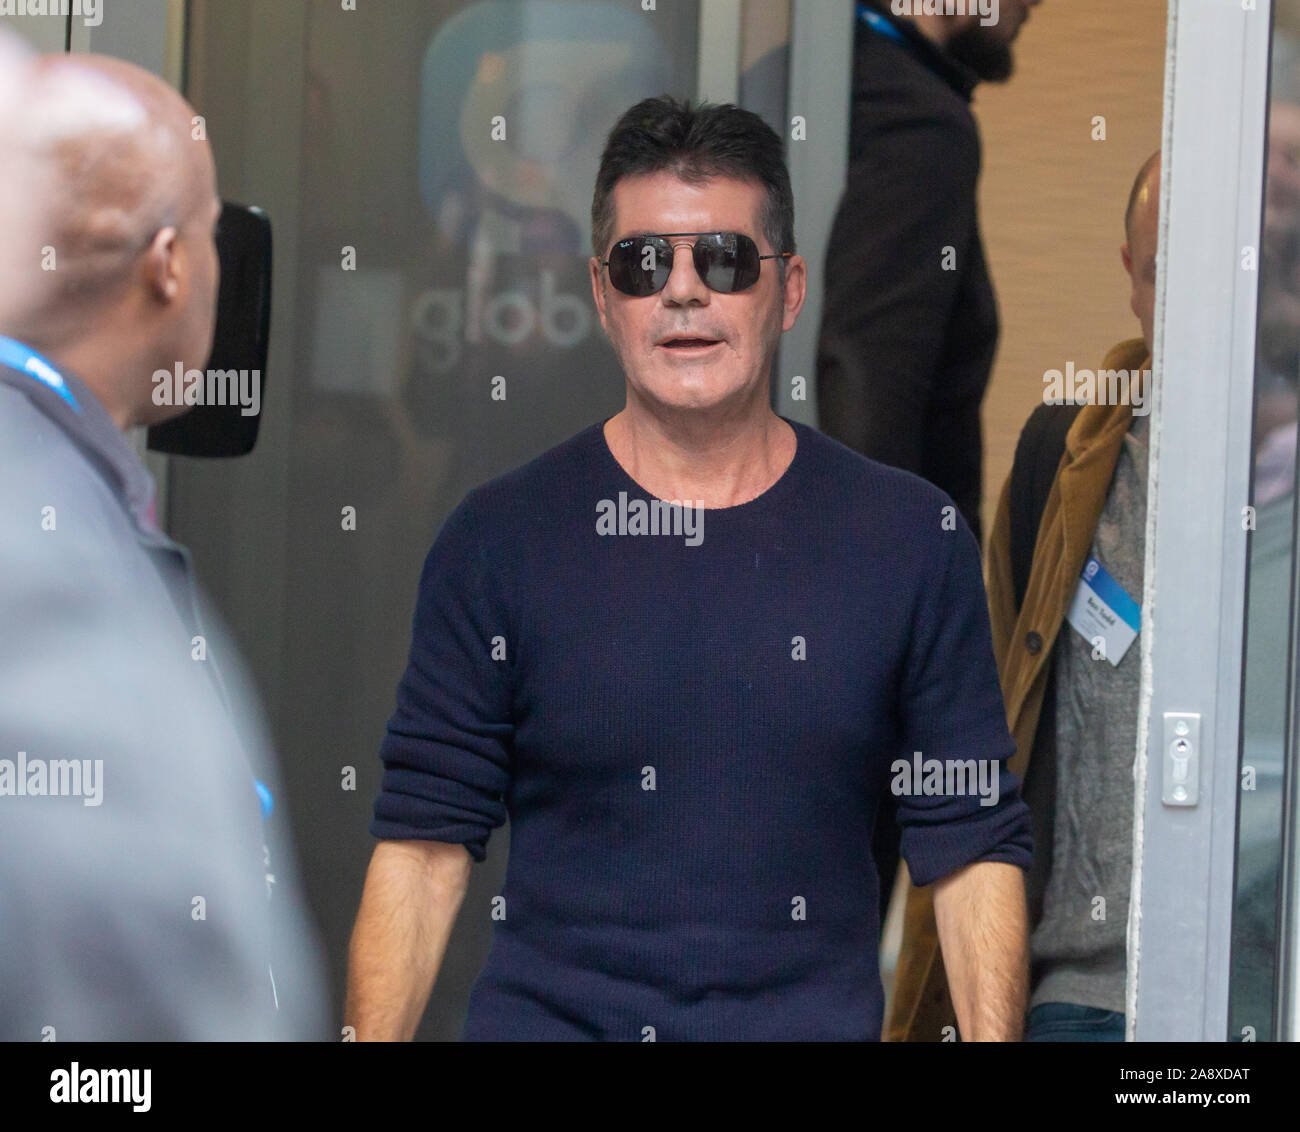 Simon Cowell, Television, music and Talent Show judge, producer and businessman, leaves the Studios of Heart FM after giving an interview. Stock Photo